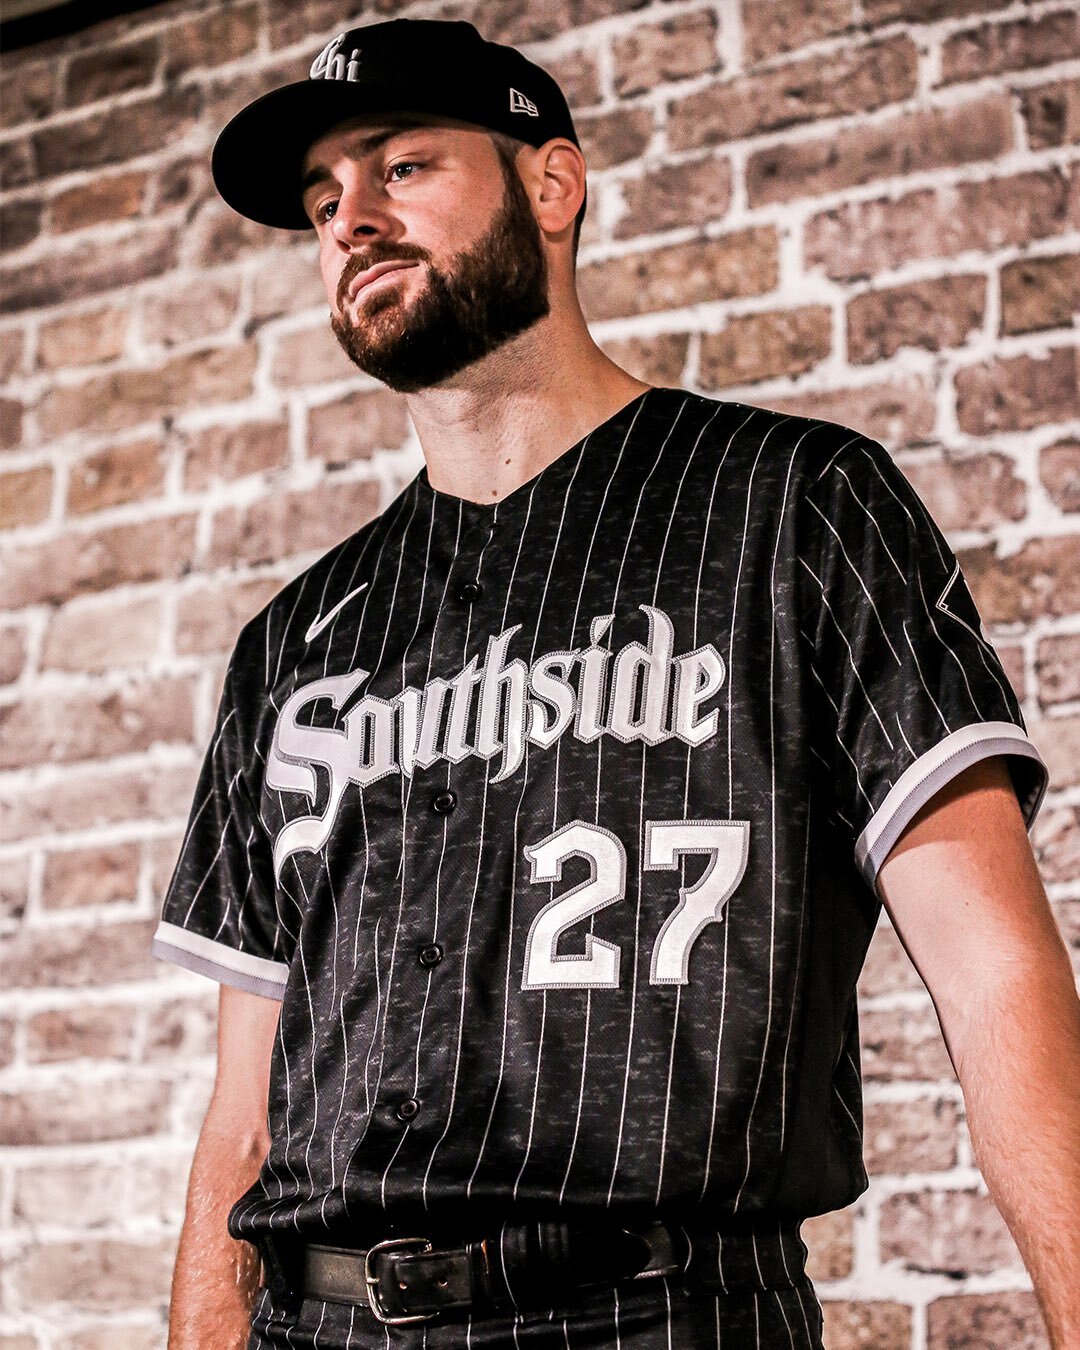 chicago white sox southside jersey